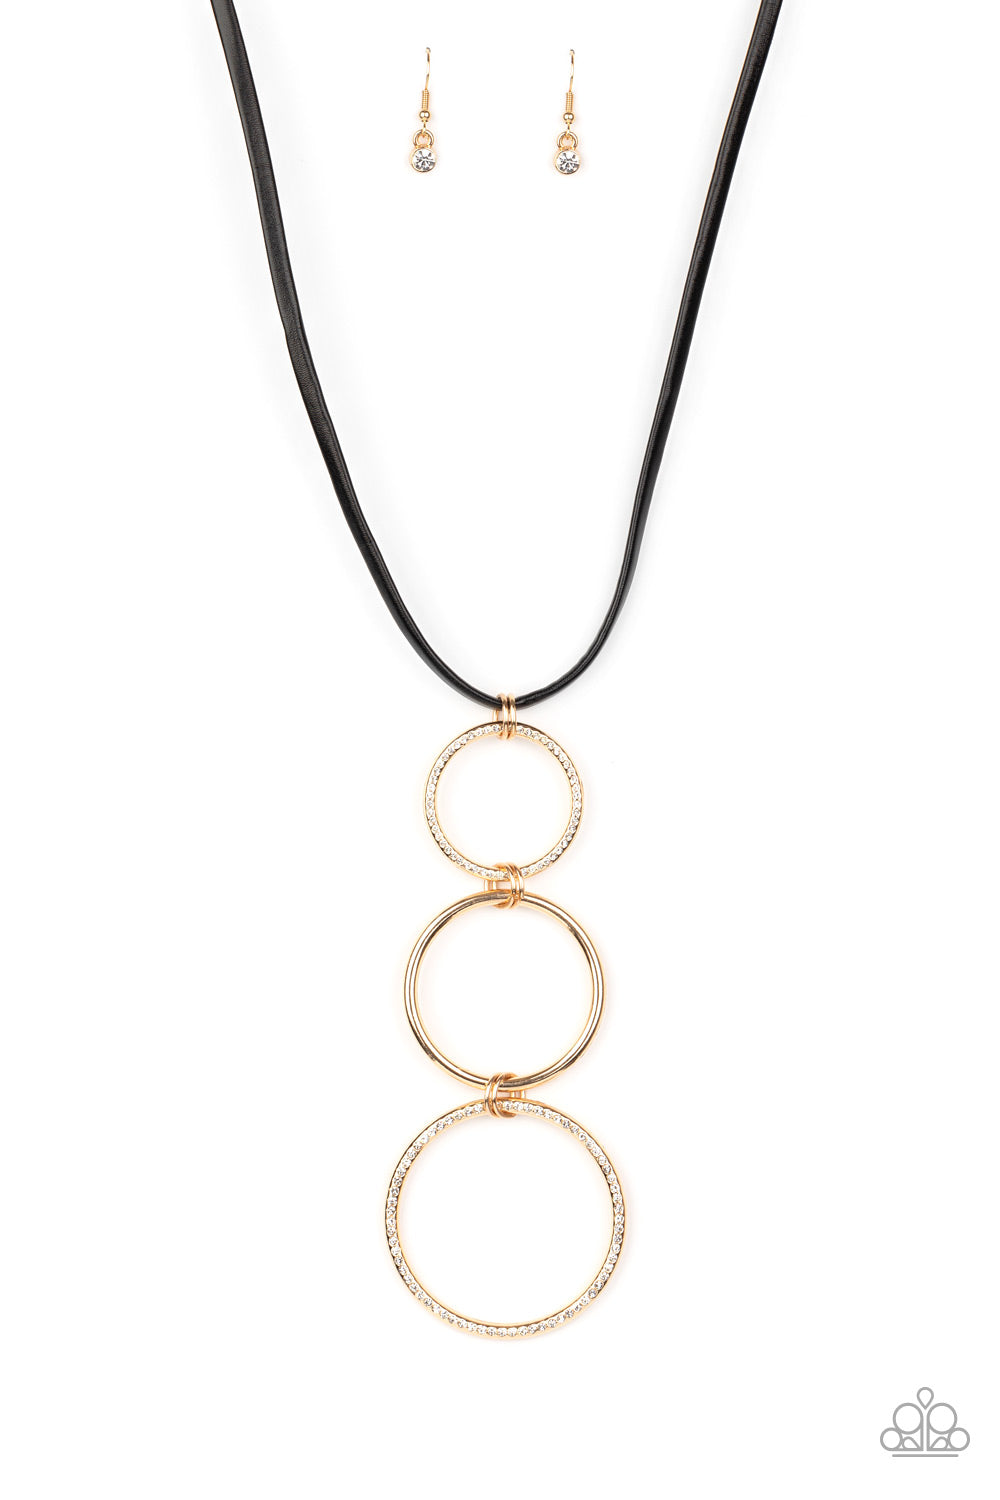 Paparazzi Accessories Curvy Couture - Gold Necklaces - Lady T Accessories